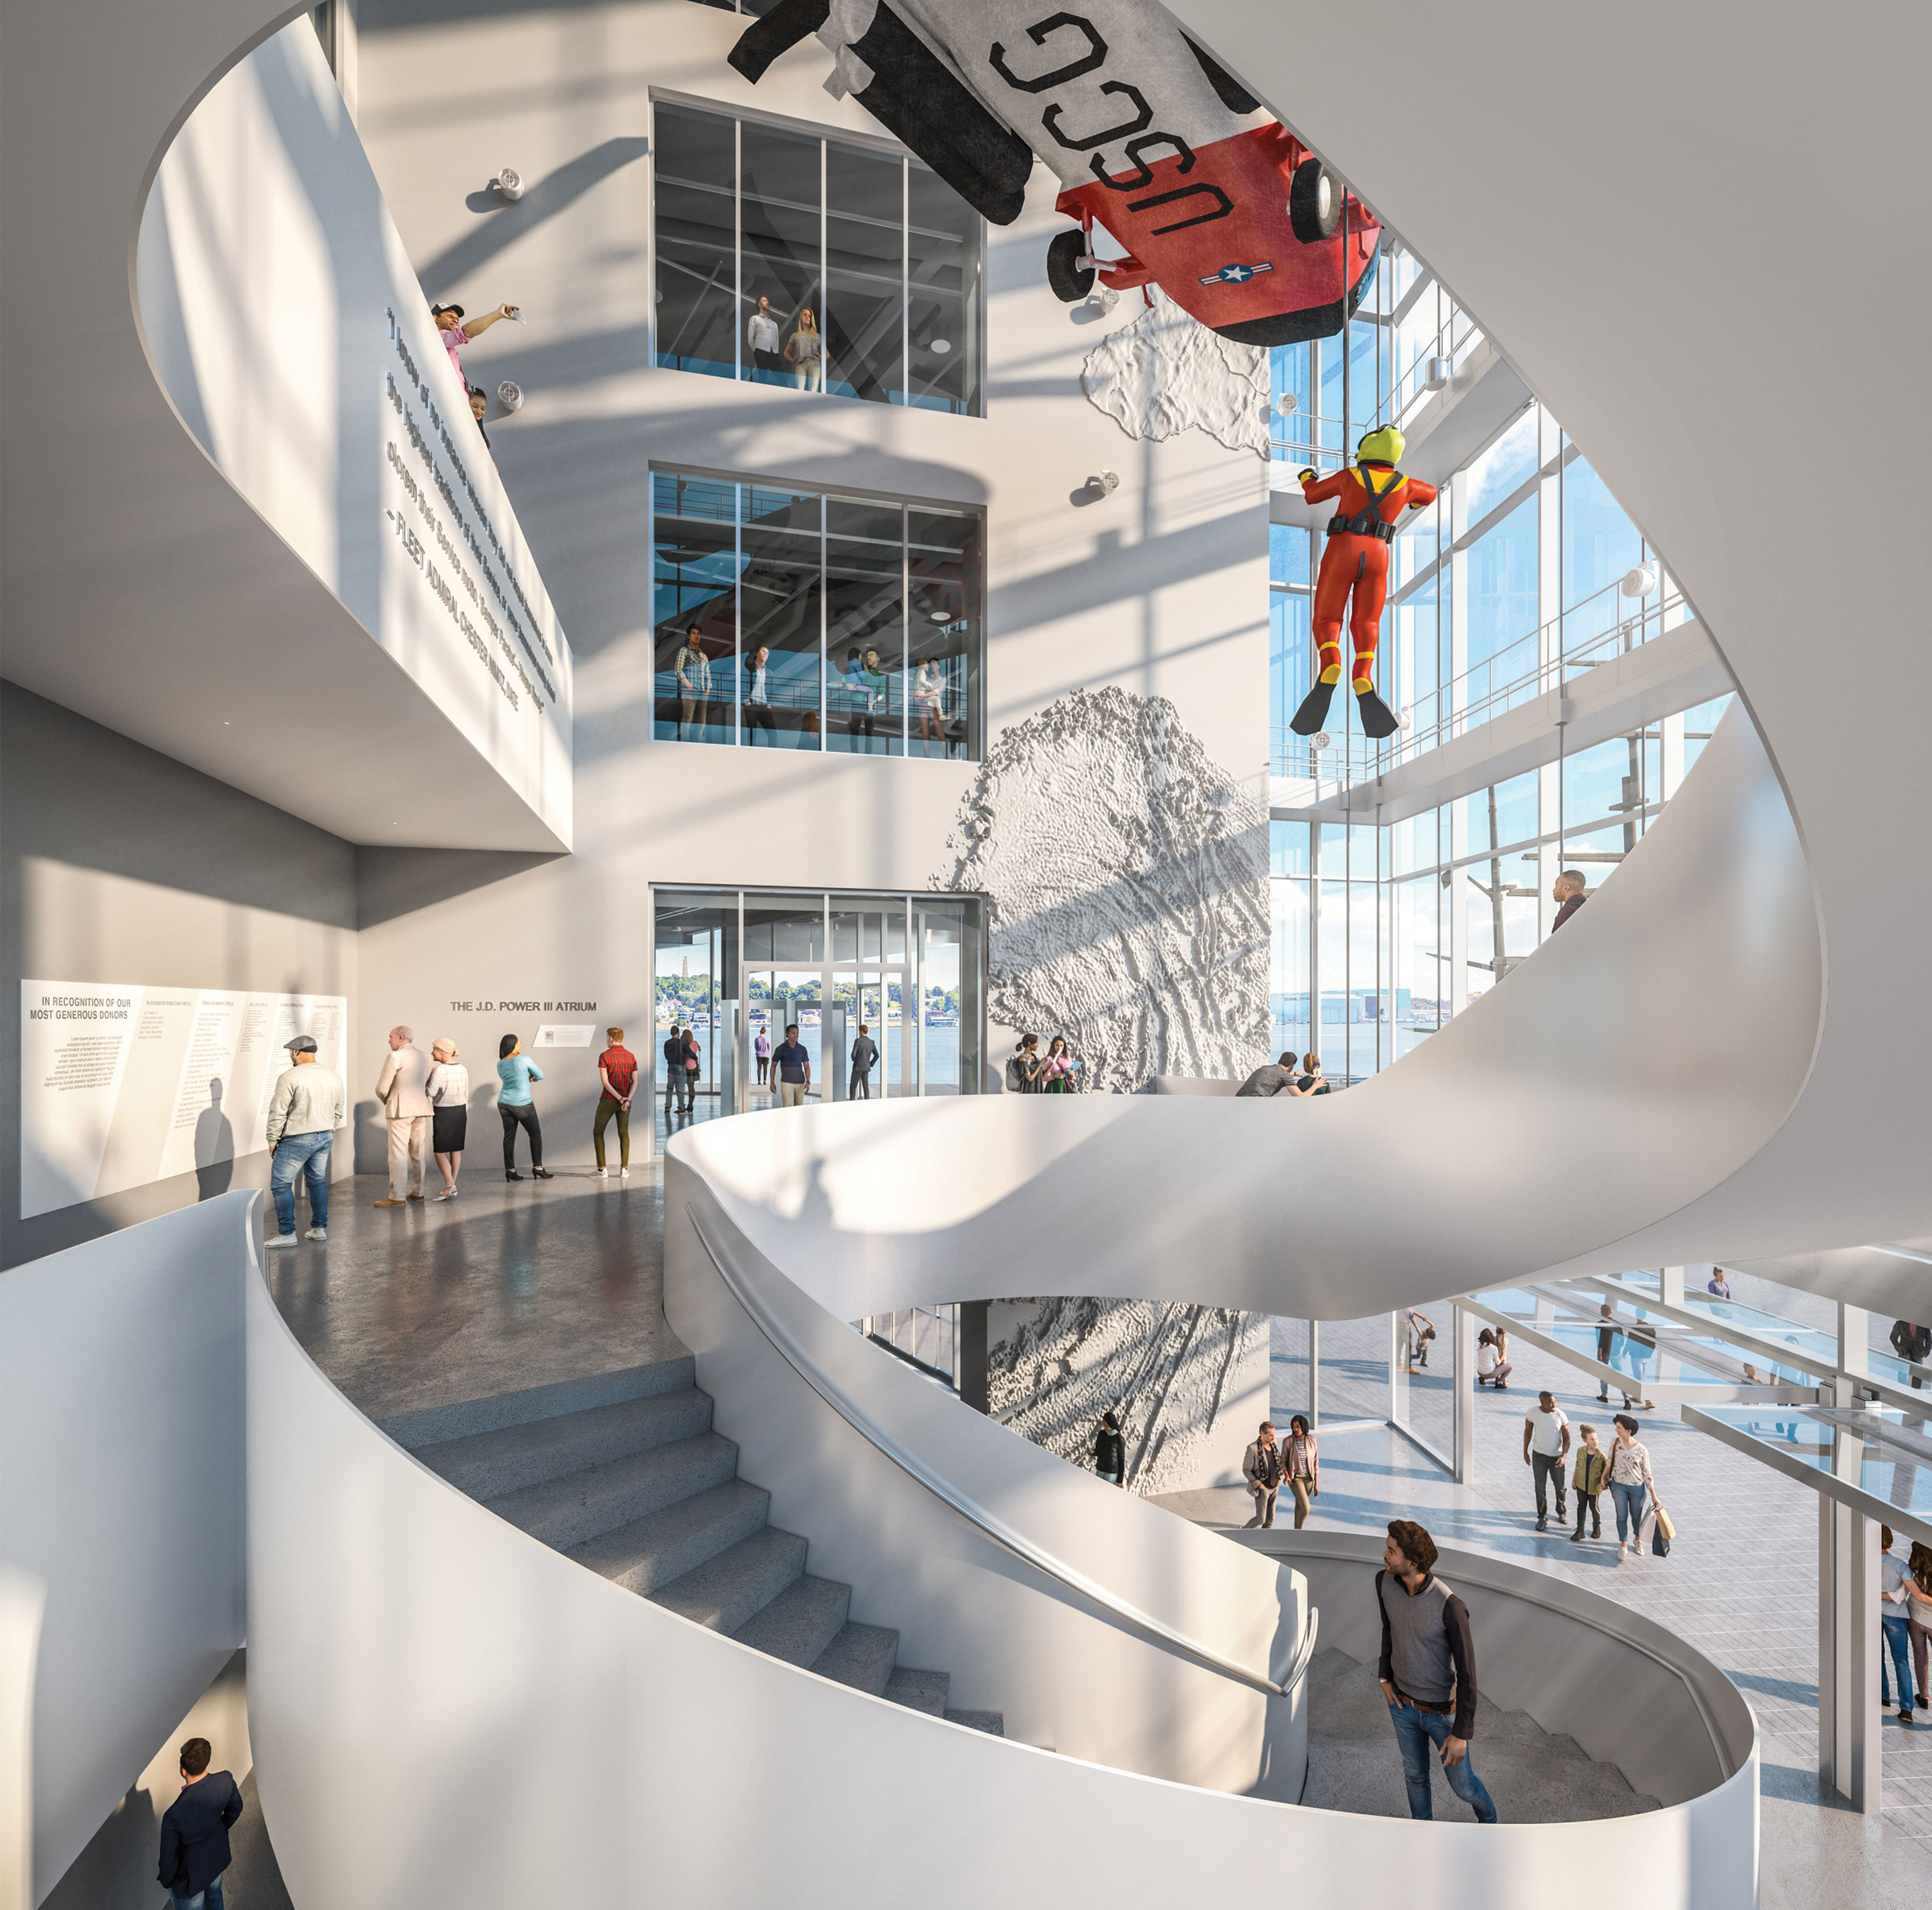 Concept art rendering of the future atrium at the National Coast Guard Museum. This displays visitors on a spiral staircase with views of some of the museum decks and main windows in the background.